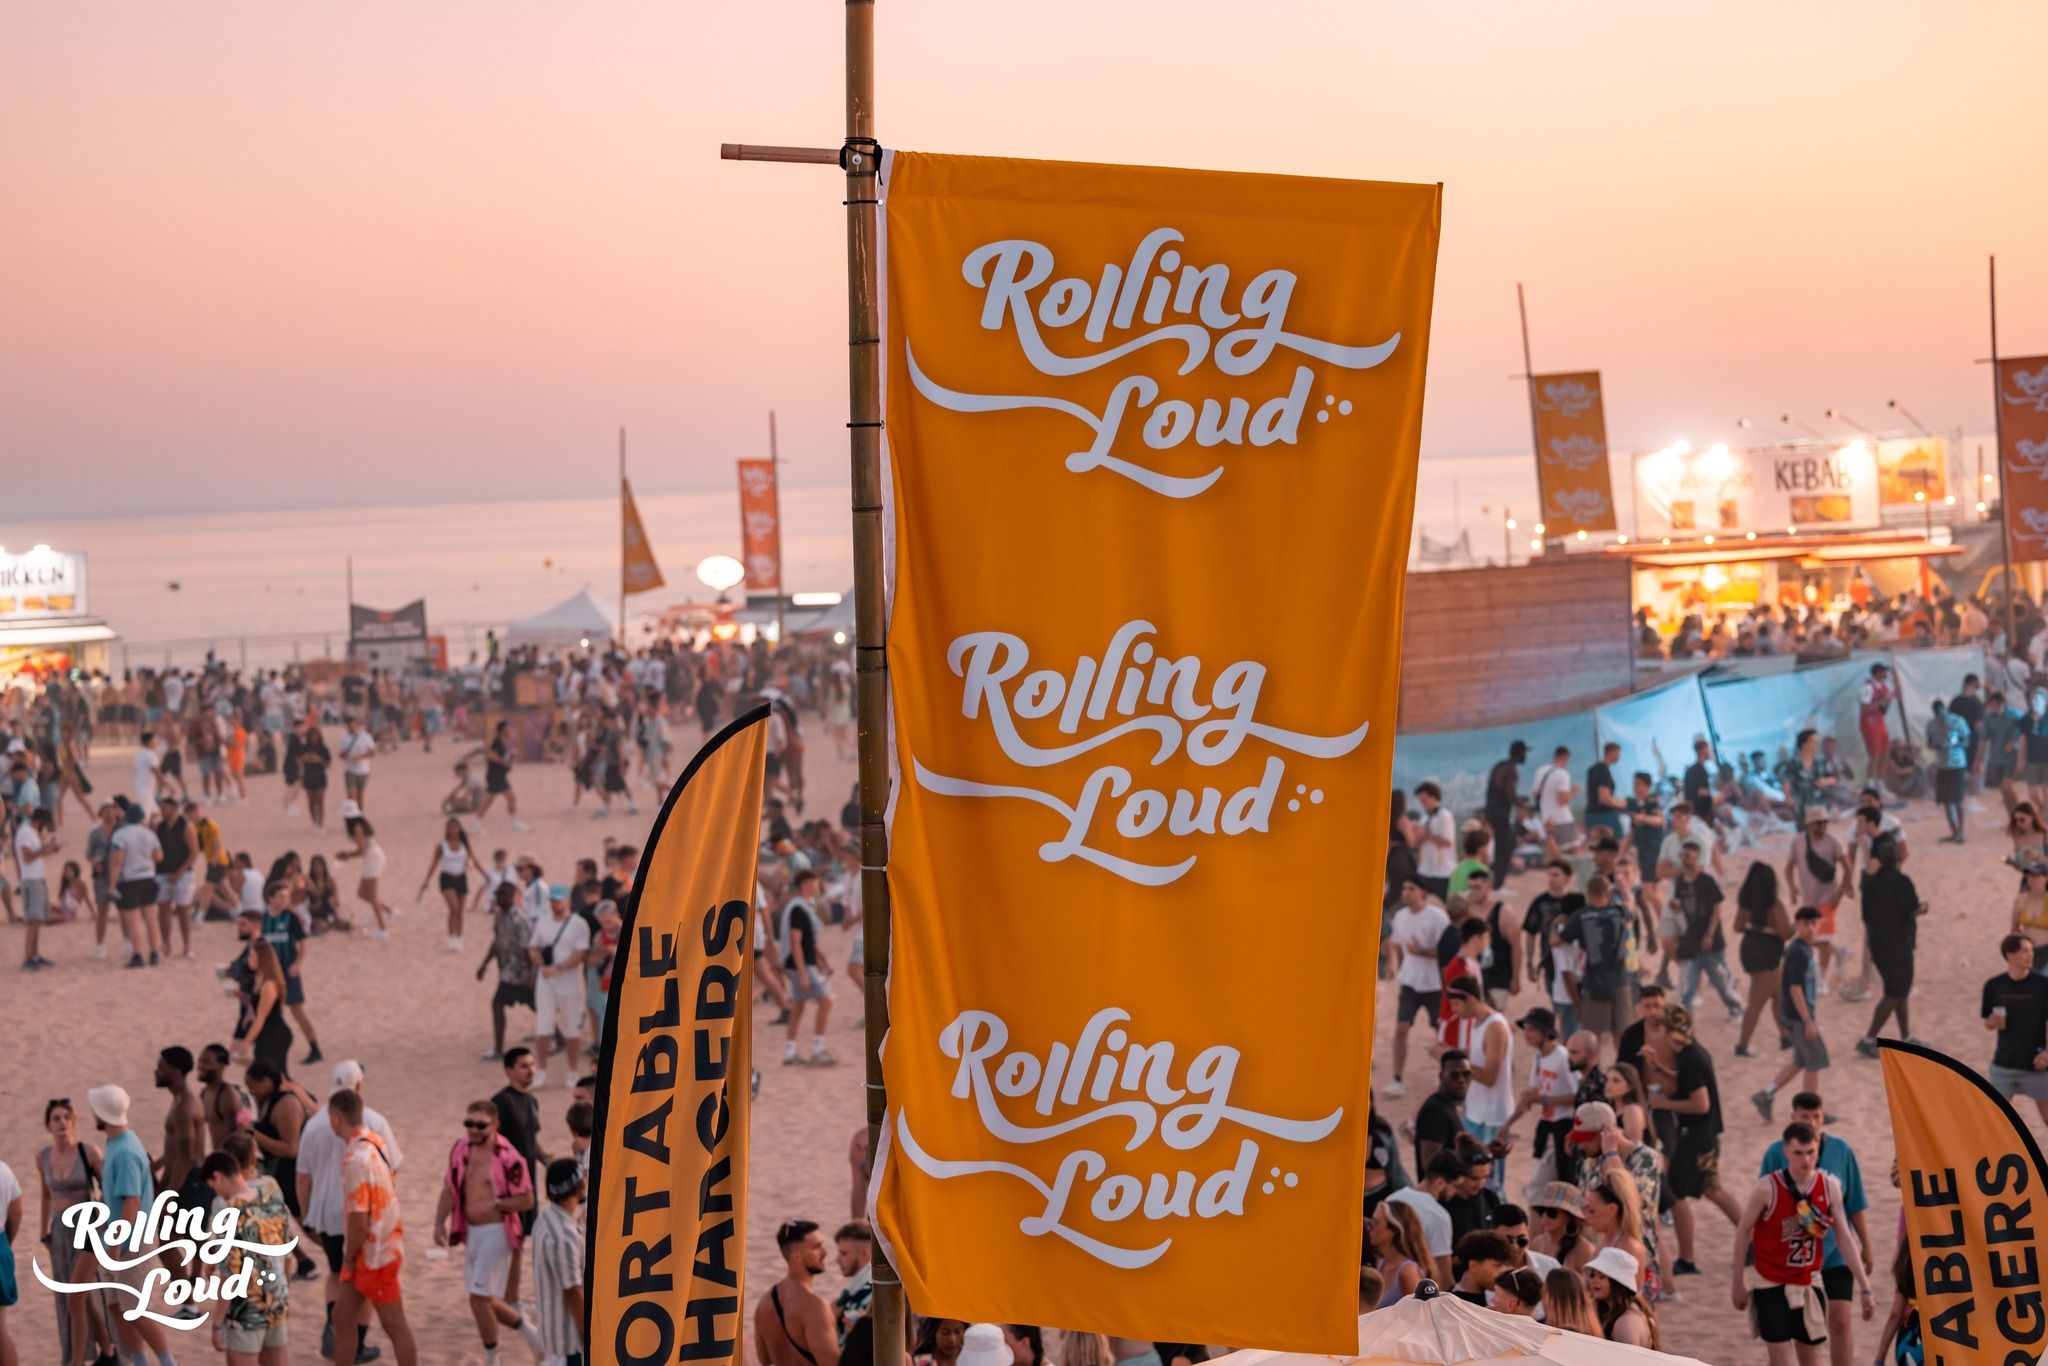 Rolling Loud is coming to Thailand in 2023